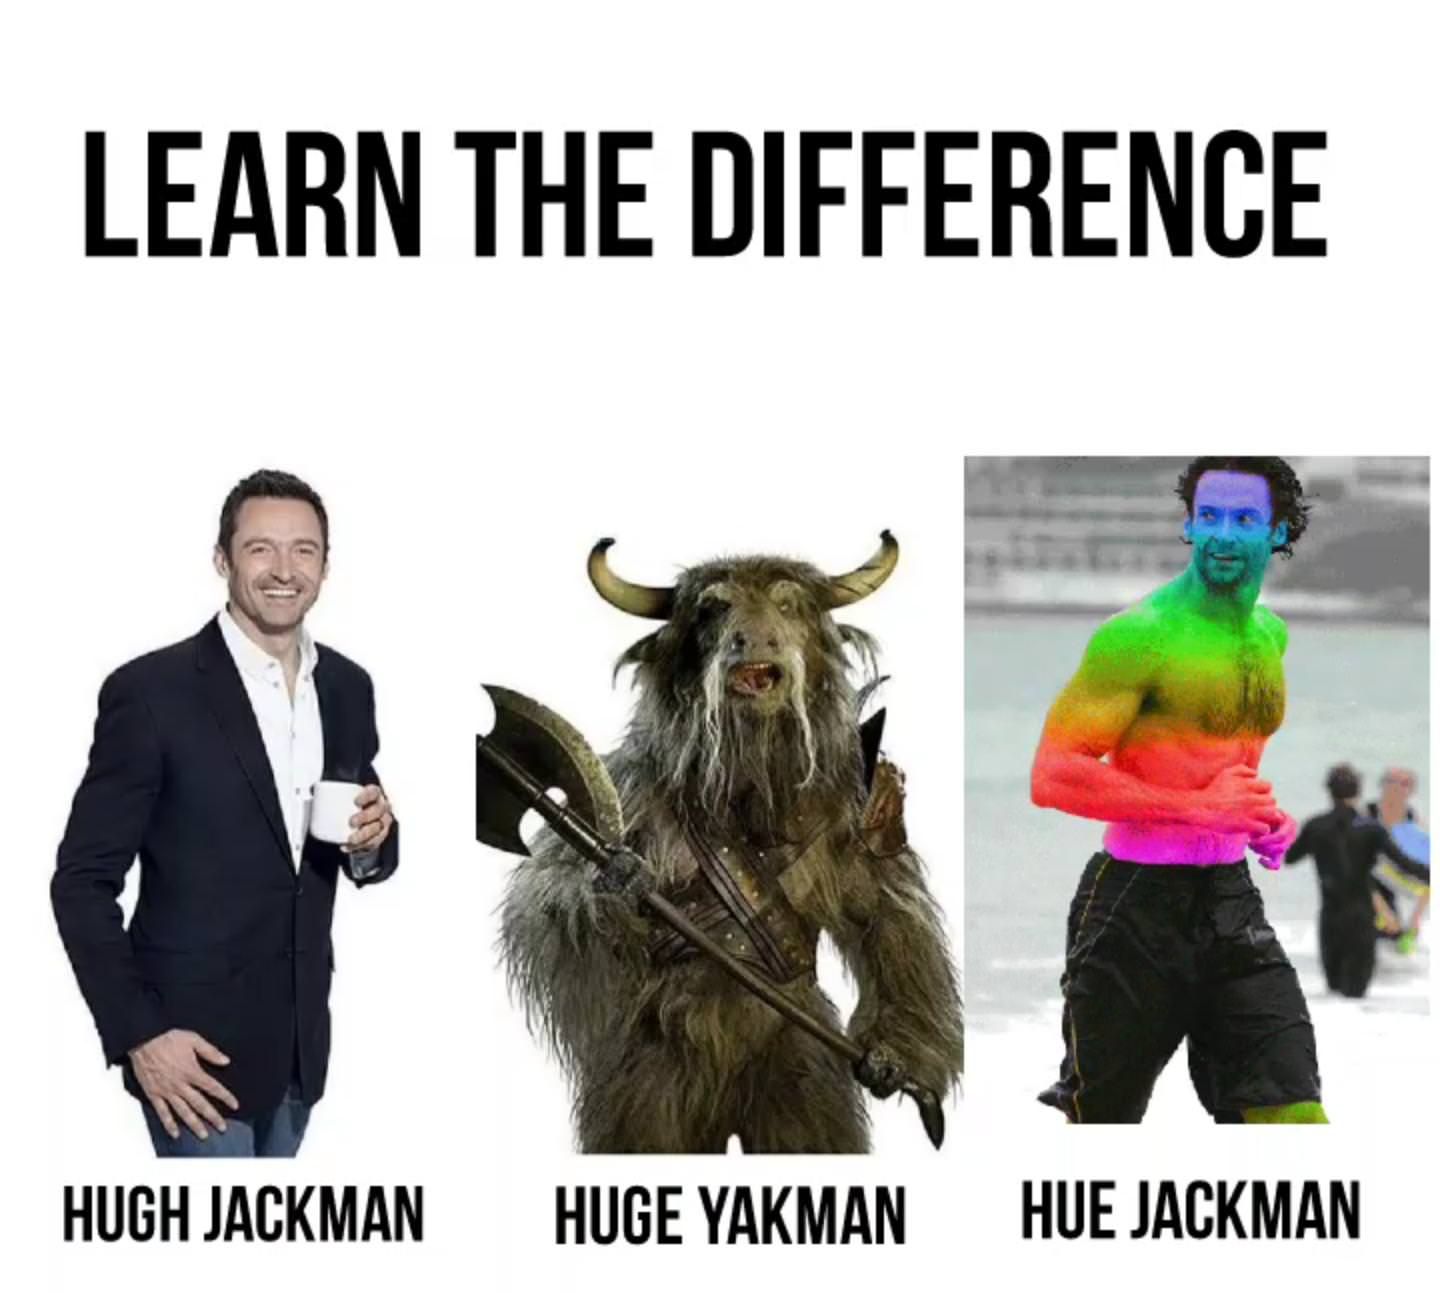 After texting the original to a friend of mine, he suggested I added a "Hue Jackman" to it. Done